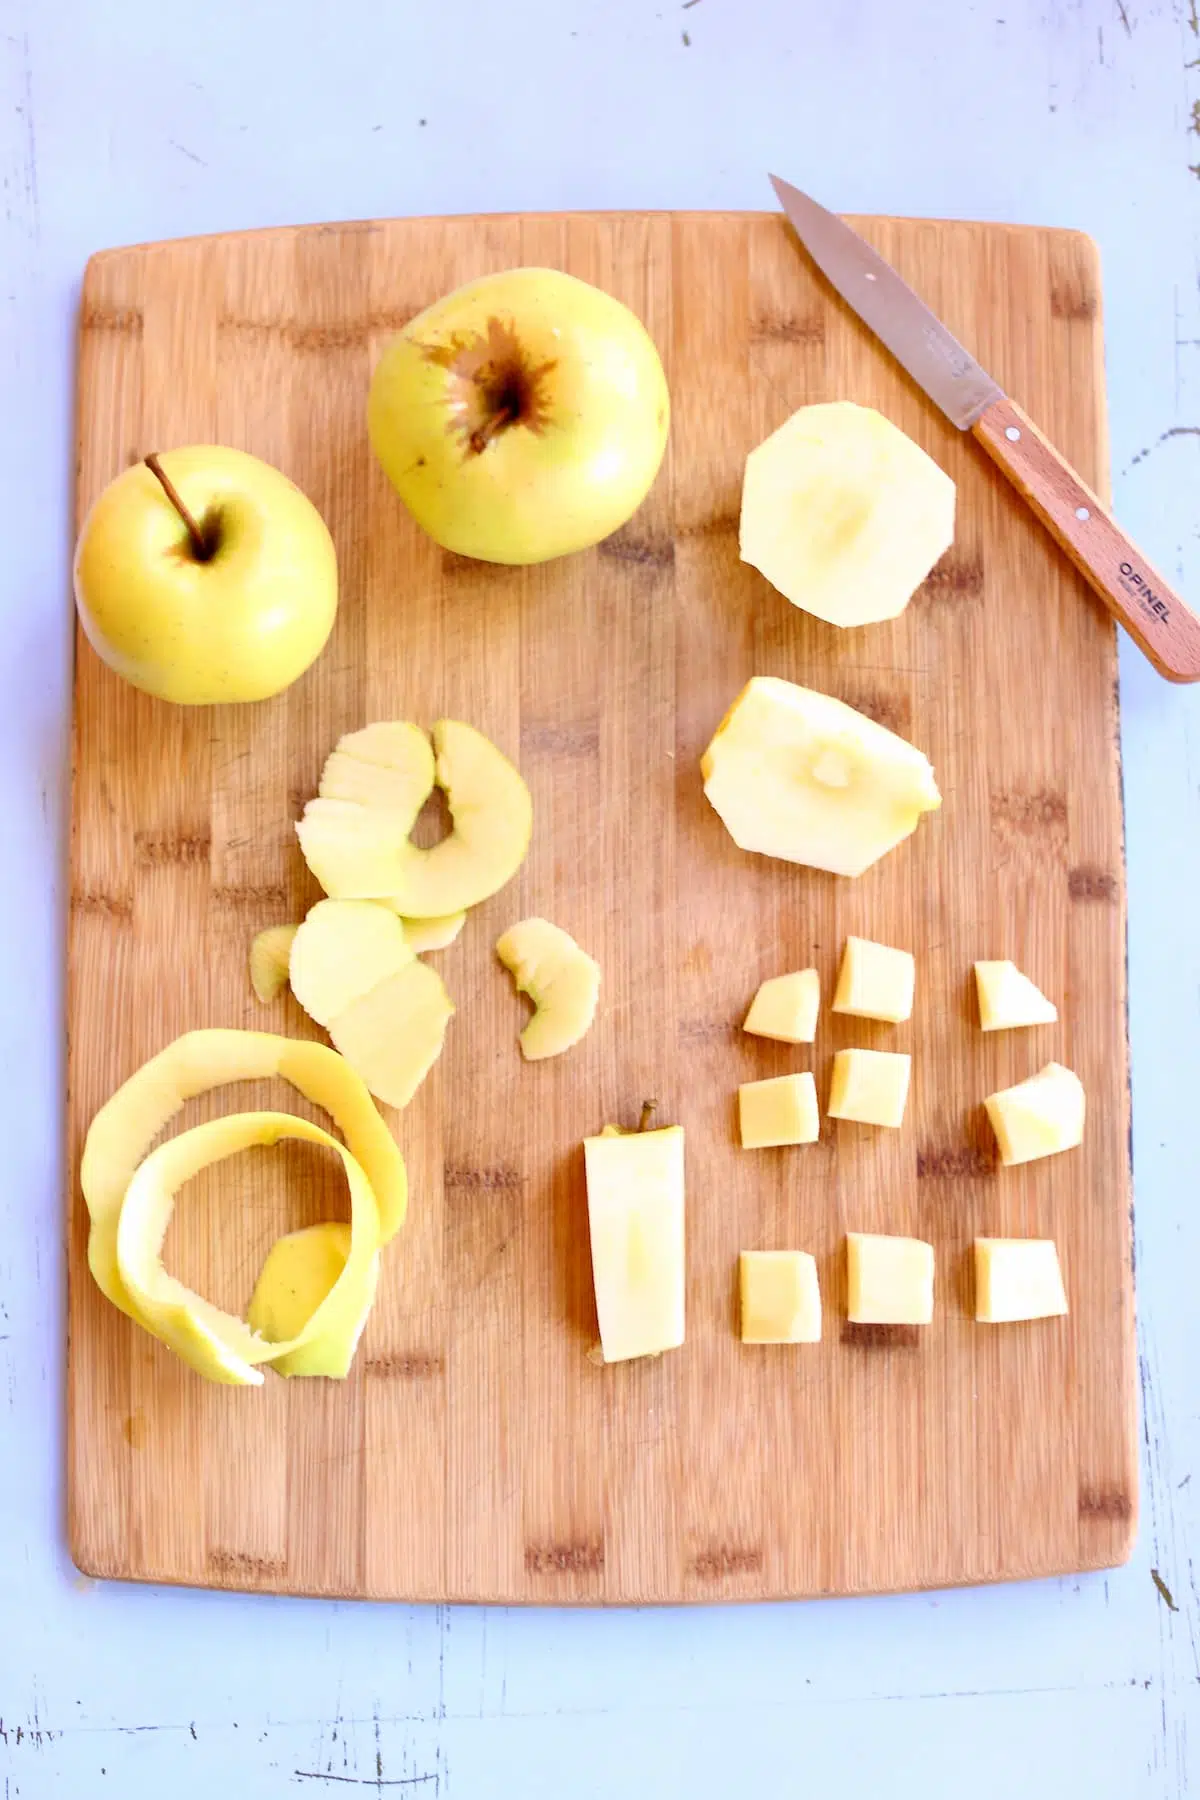 a cutting board with cut up apples on it and a knife.